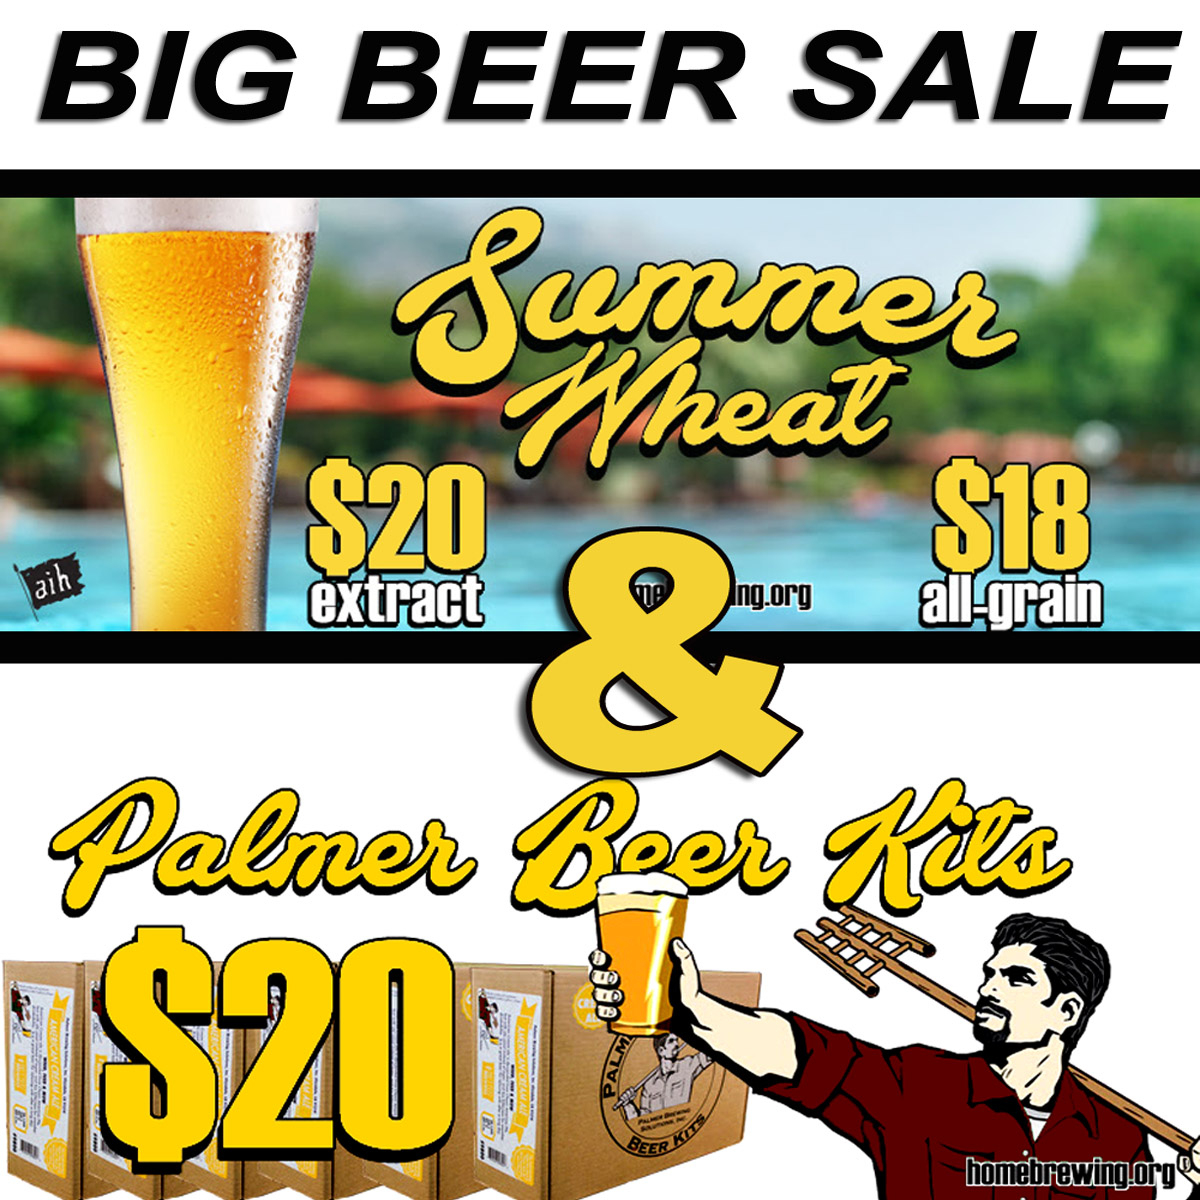 Beer Coupons And Beer Discounts : Yatra Coupon Codes 2018 For - Free Printable Beer Coupons